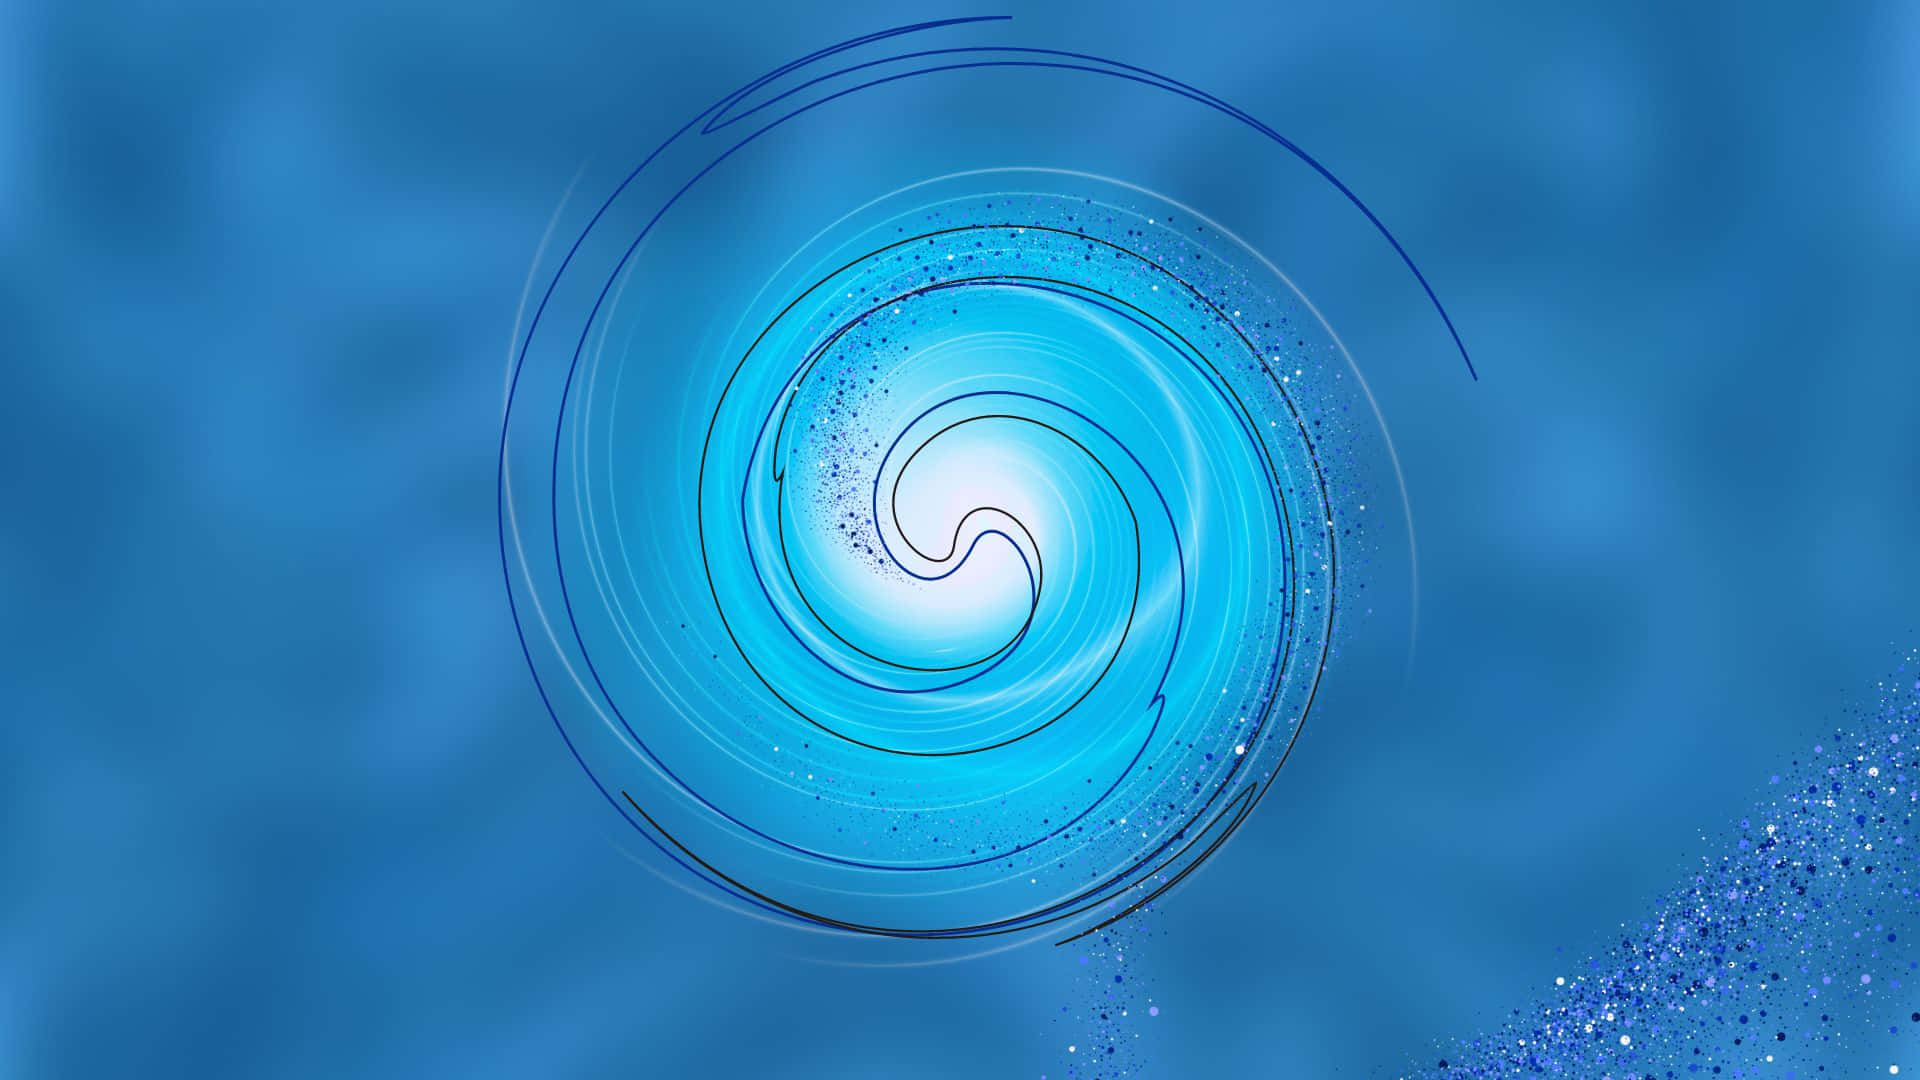 Bright Blue Swirl Abstract Background